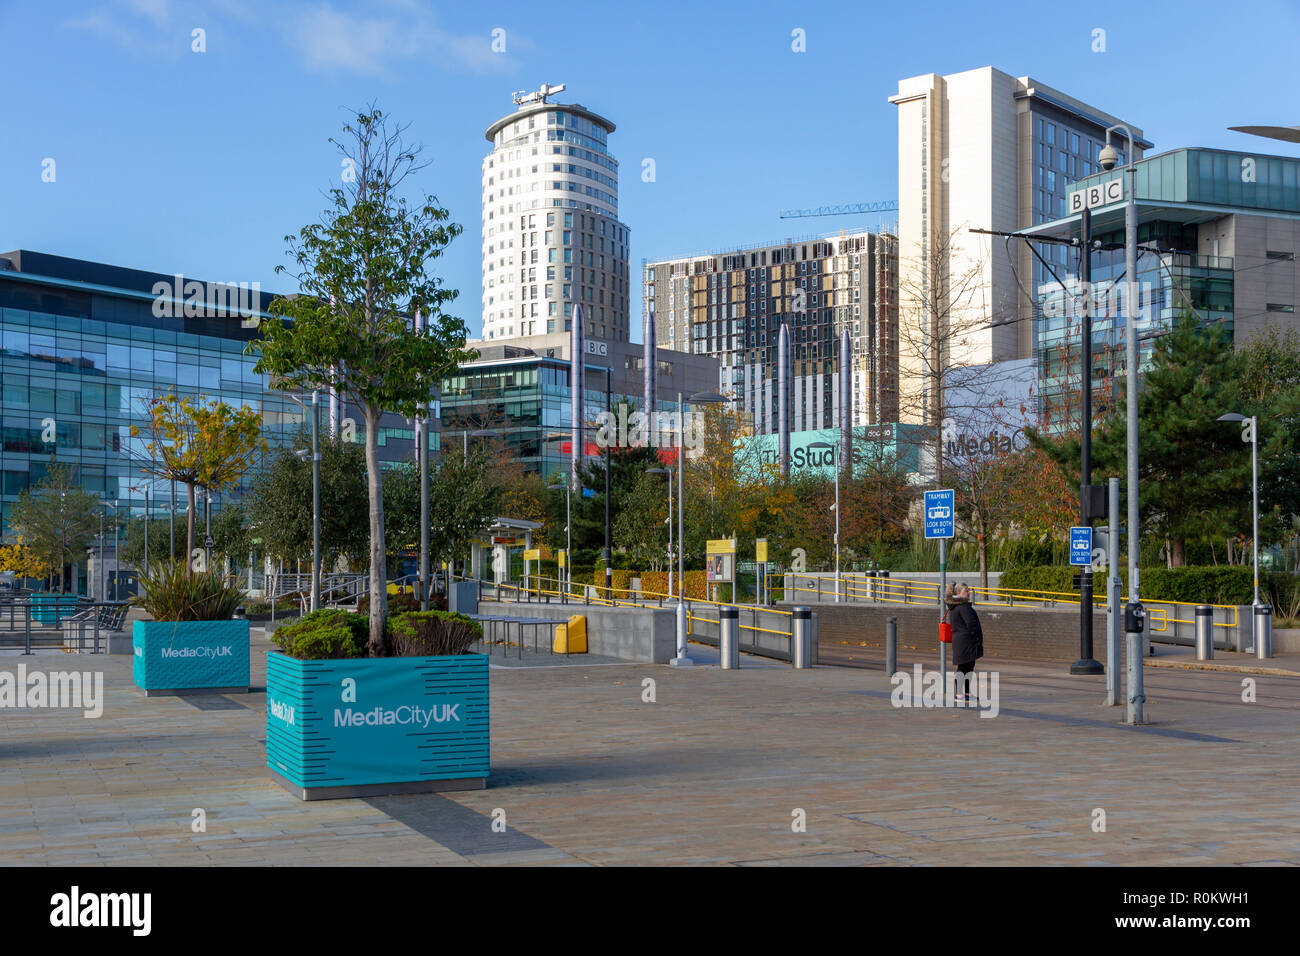 MediaCityUK Buildings in Salford Quays, Manchester, England. Stock Photo